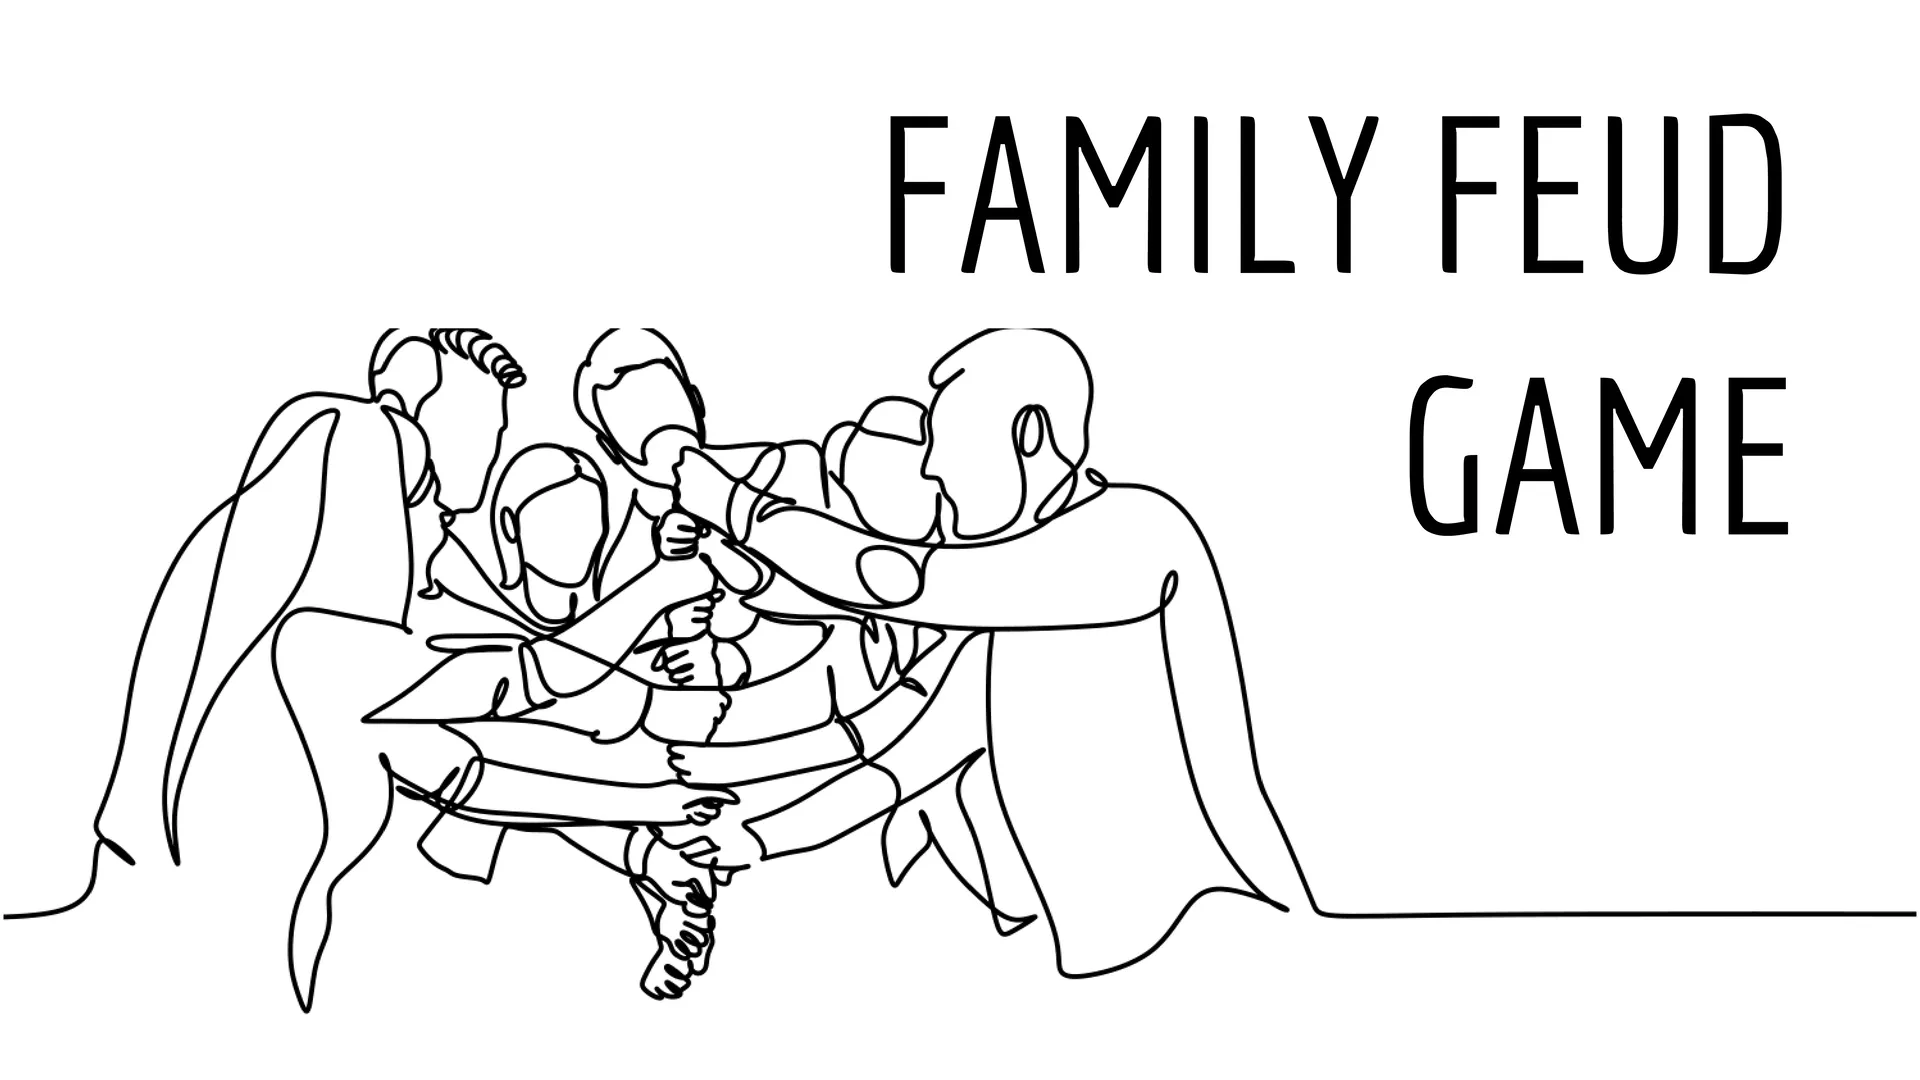 Family Feud Game Template for Large Groups